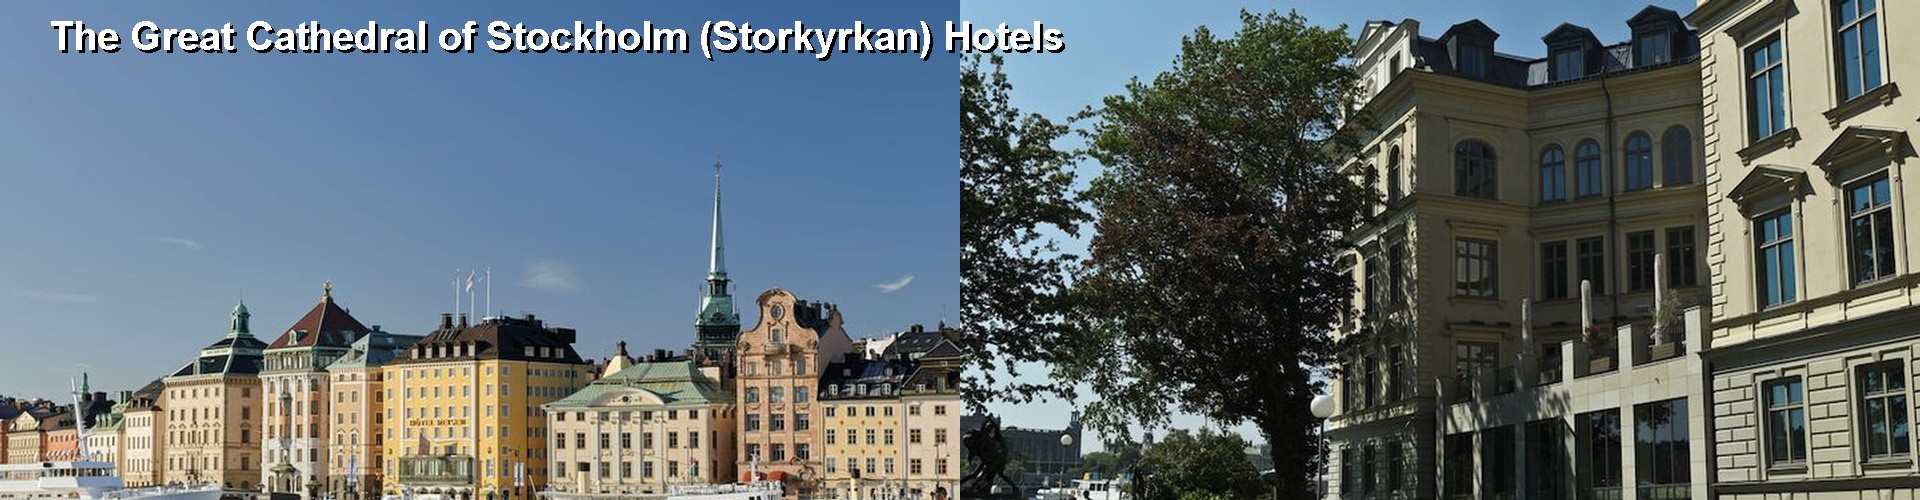 5 Best Hotels near The Great Cathedral of Stockholm (Storkyrkan)